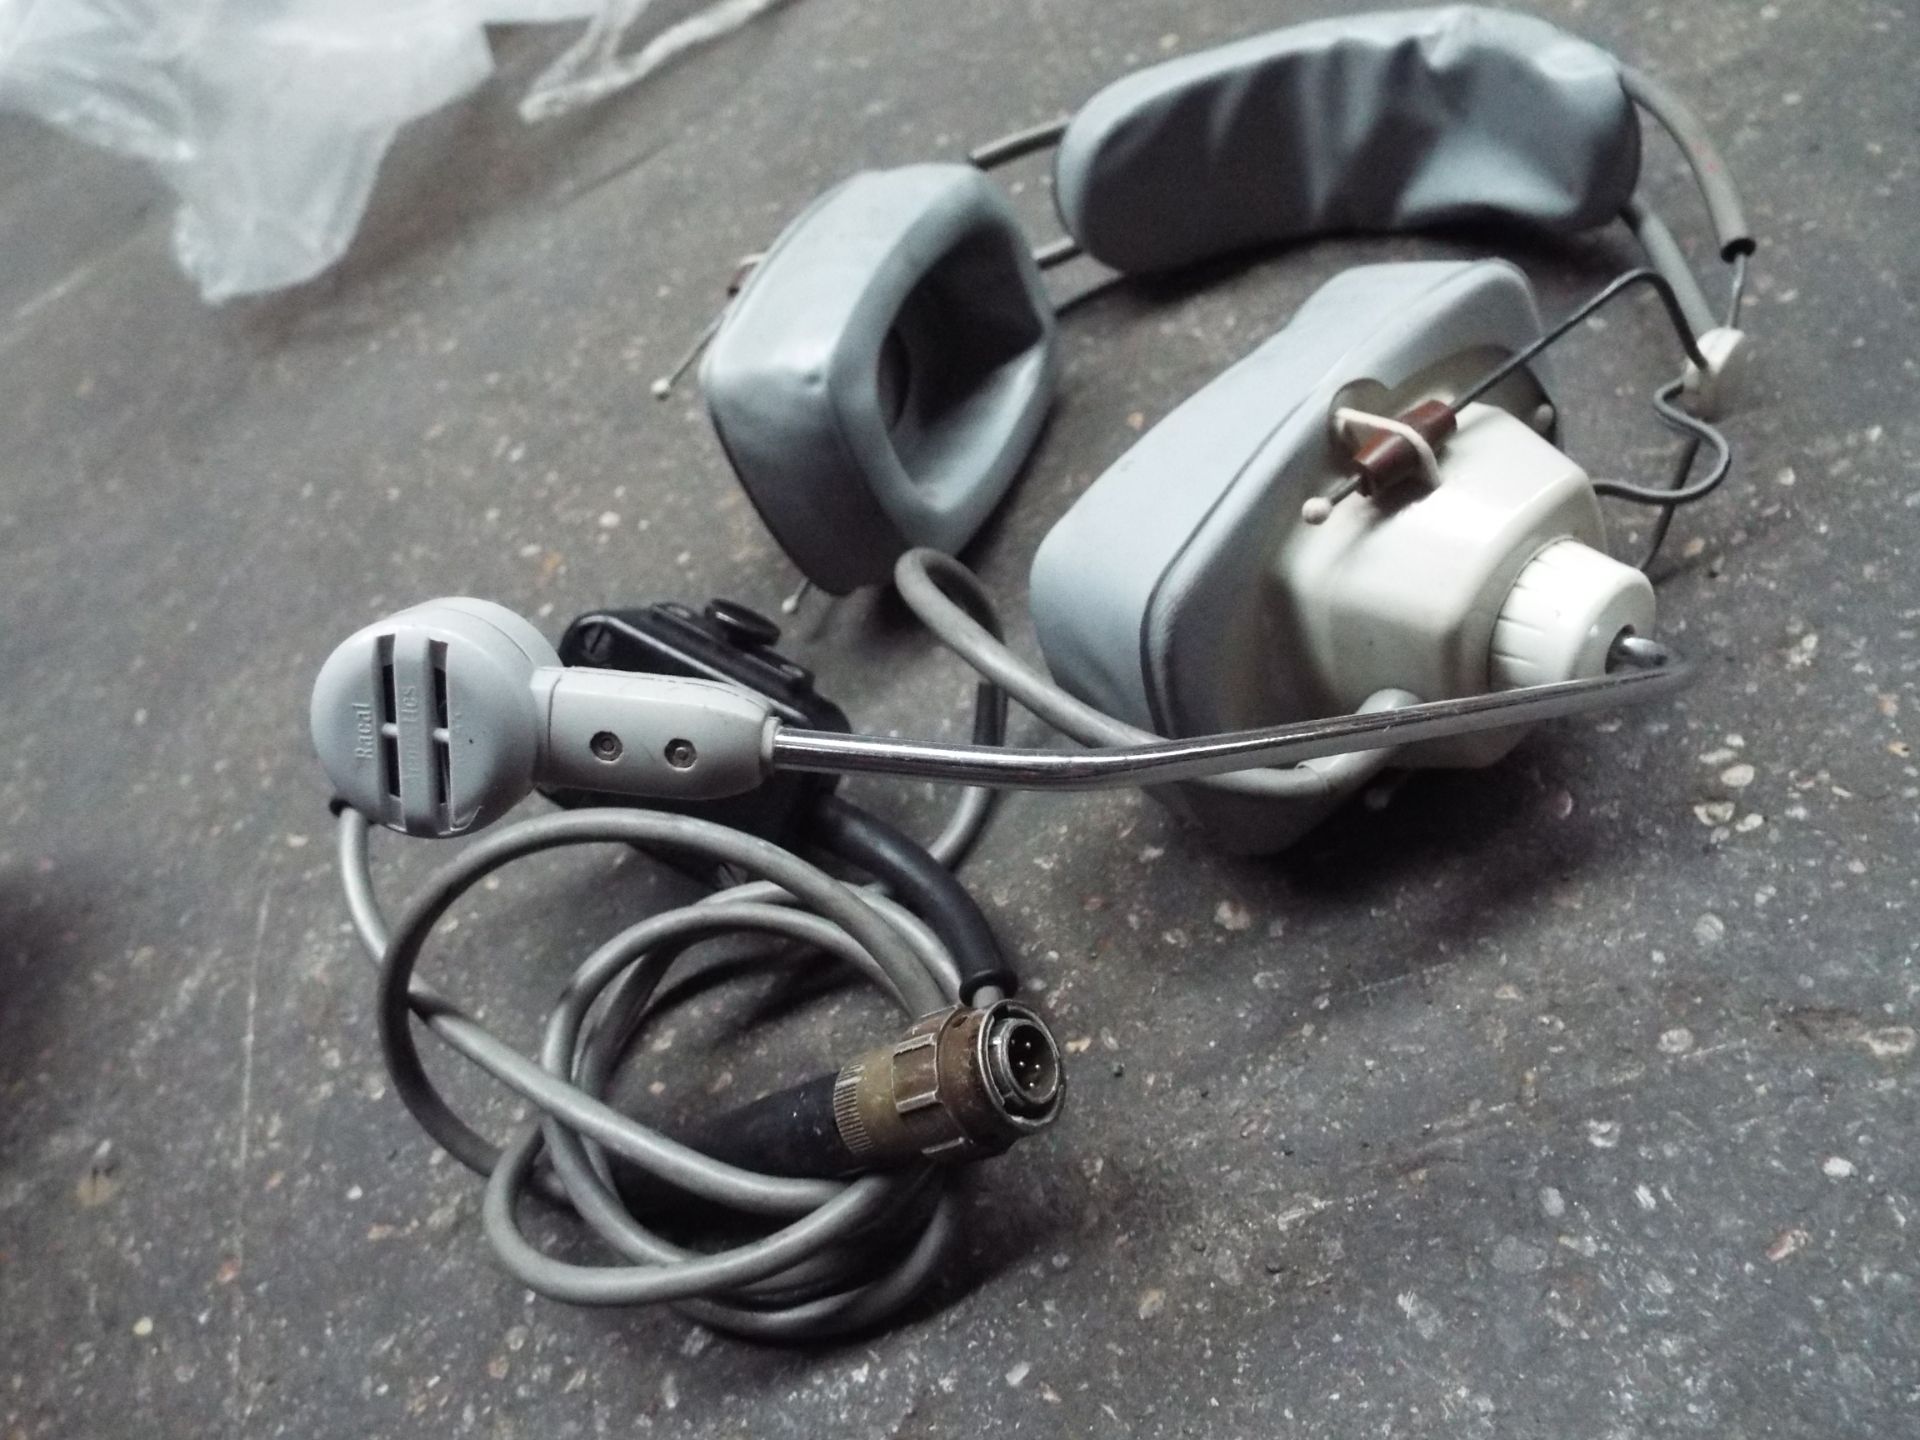 11 x Amplivox Astrolite Headsets as used by Air Traffic Control and Pilots - Bild 3 aus 5